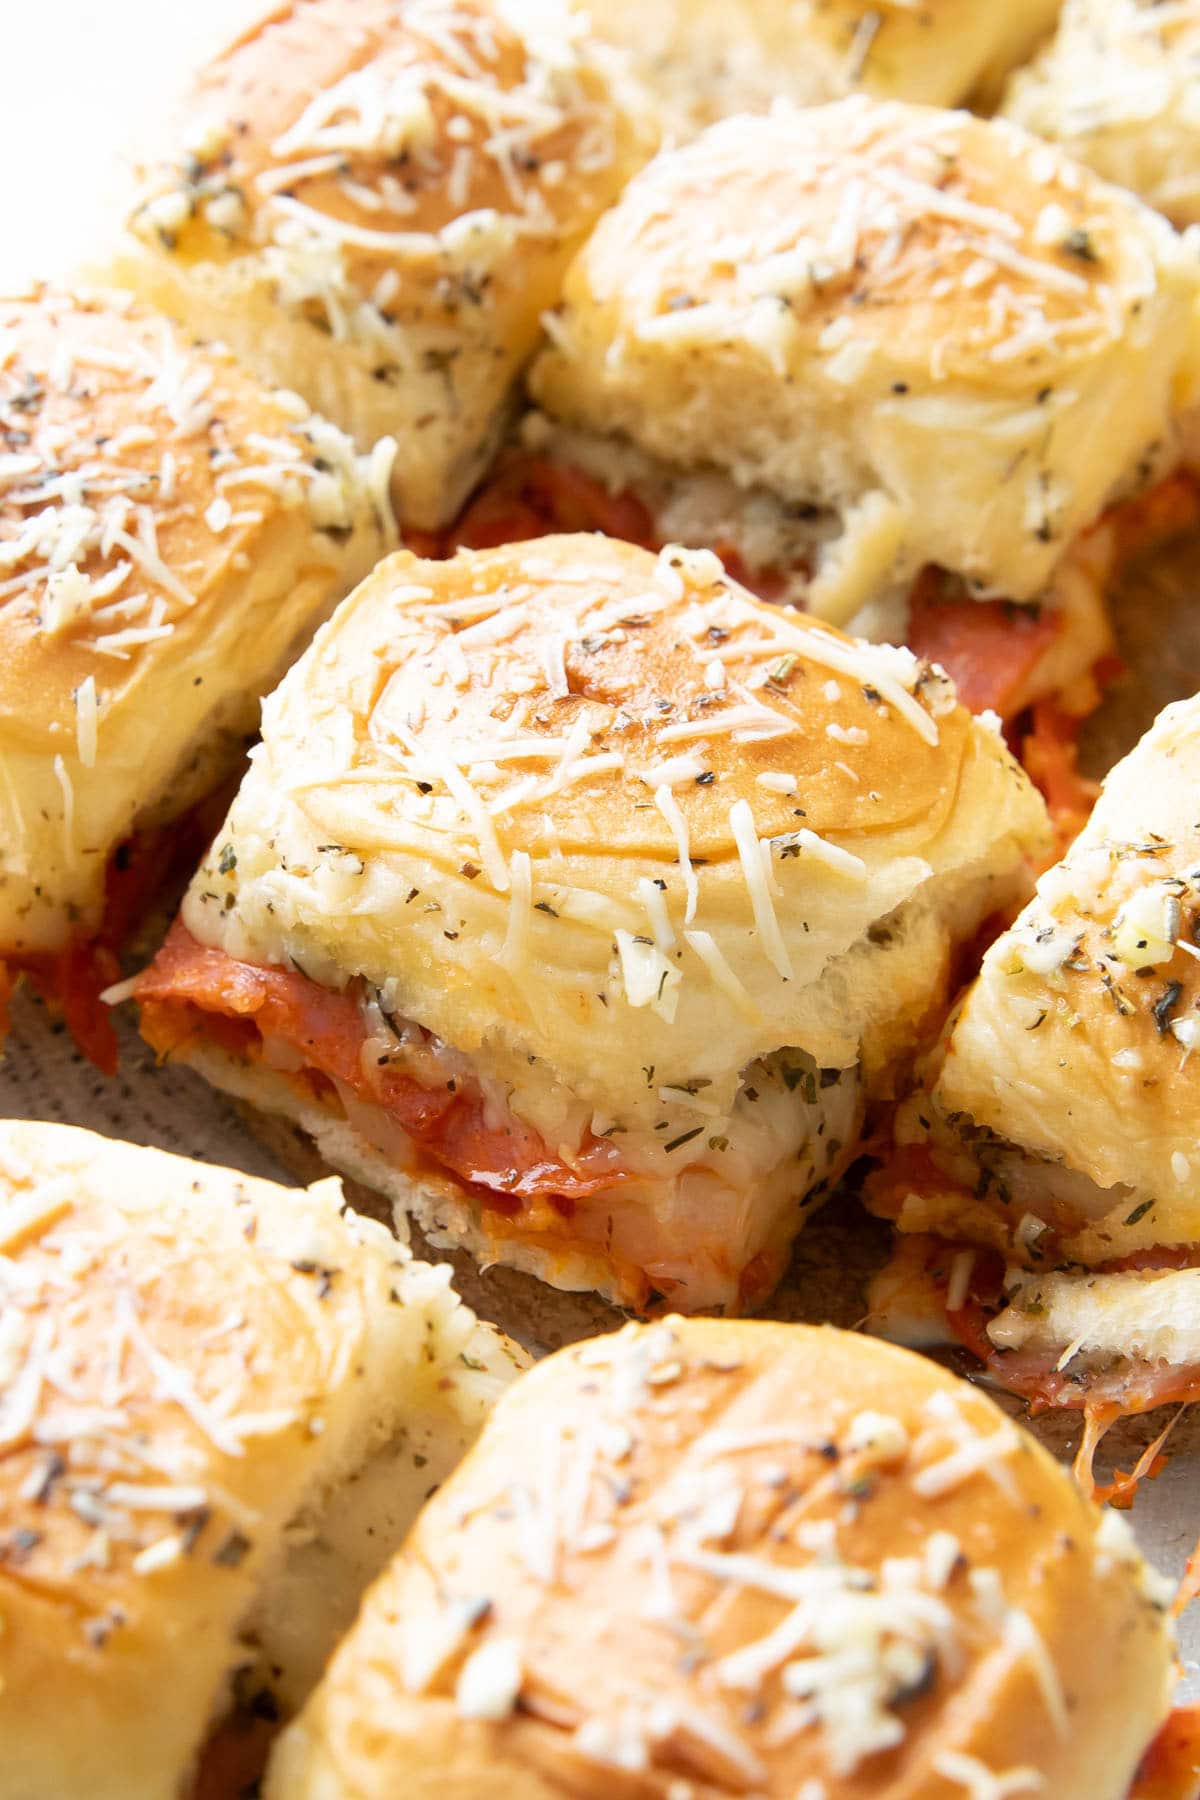 Pizza Sliders freshly baked and sliced with parmesan topping